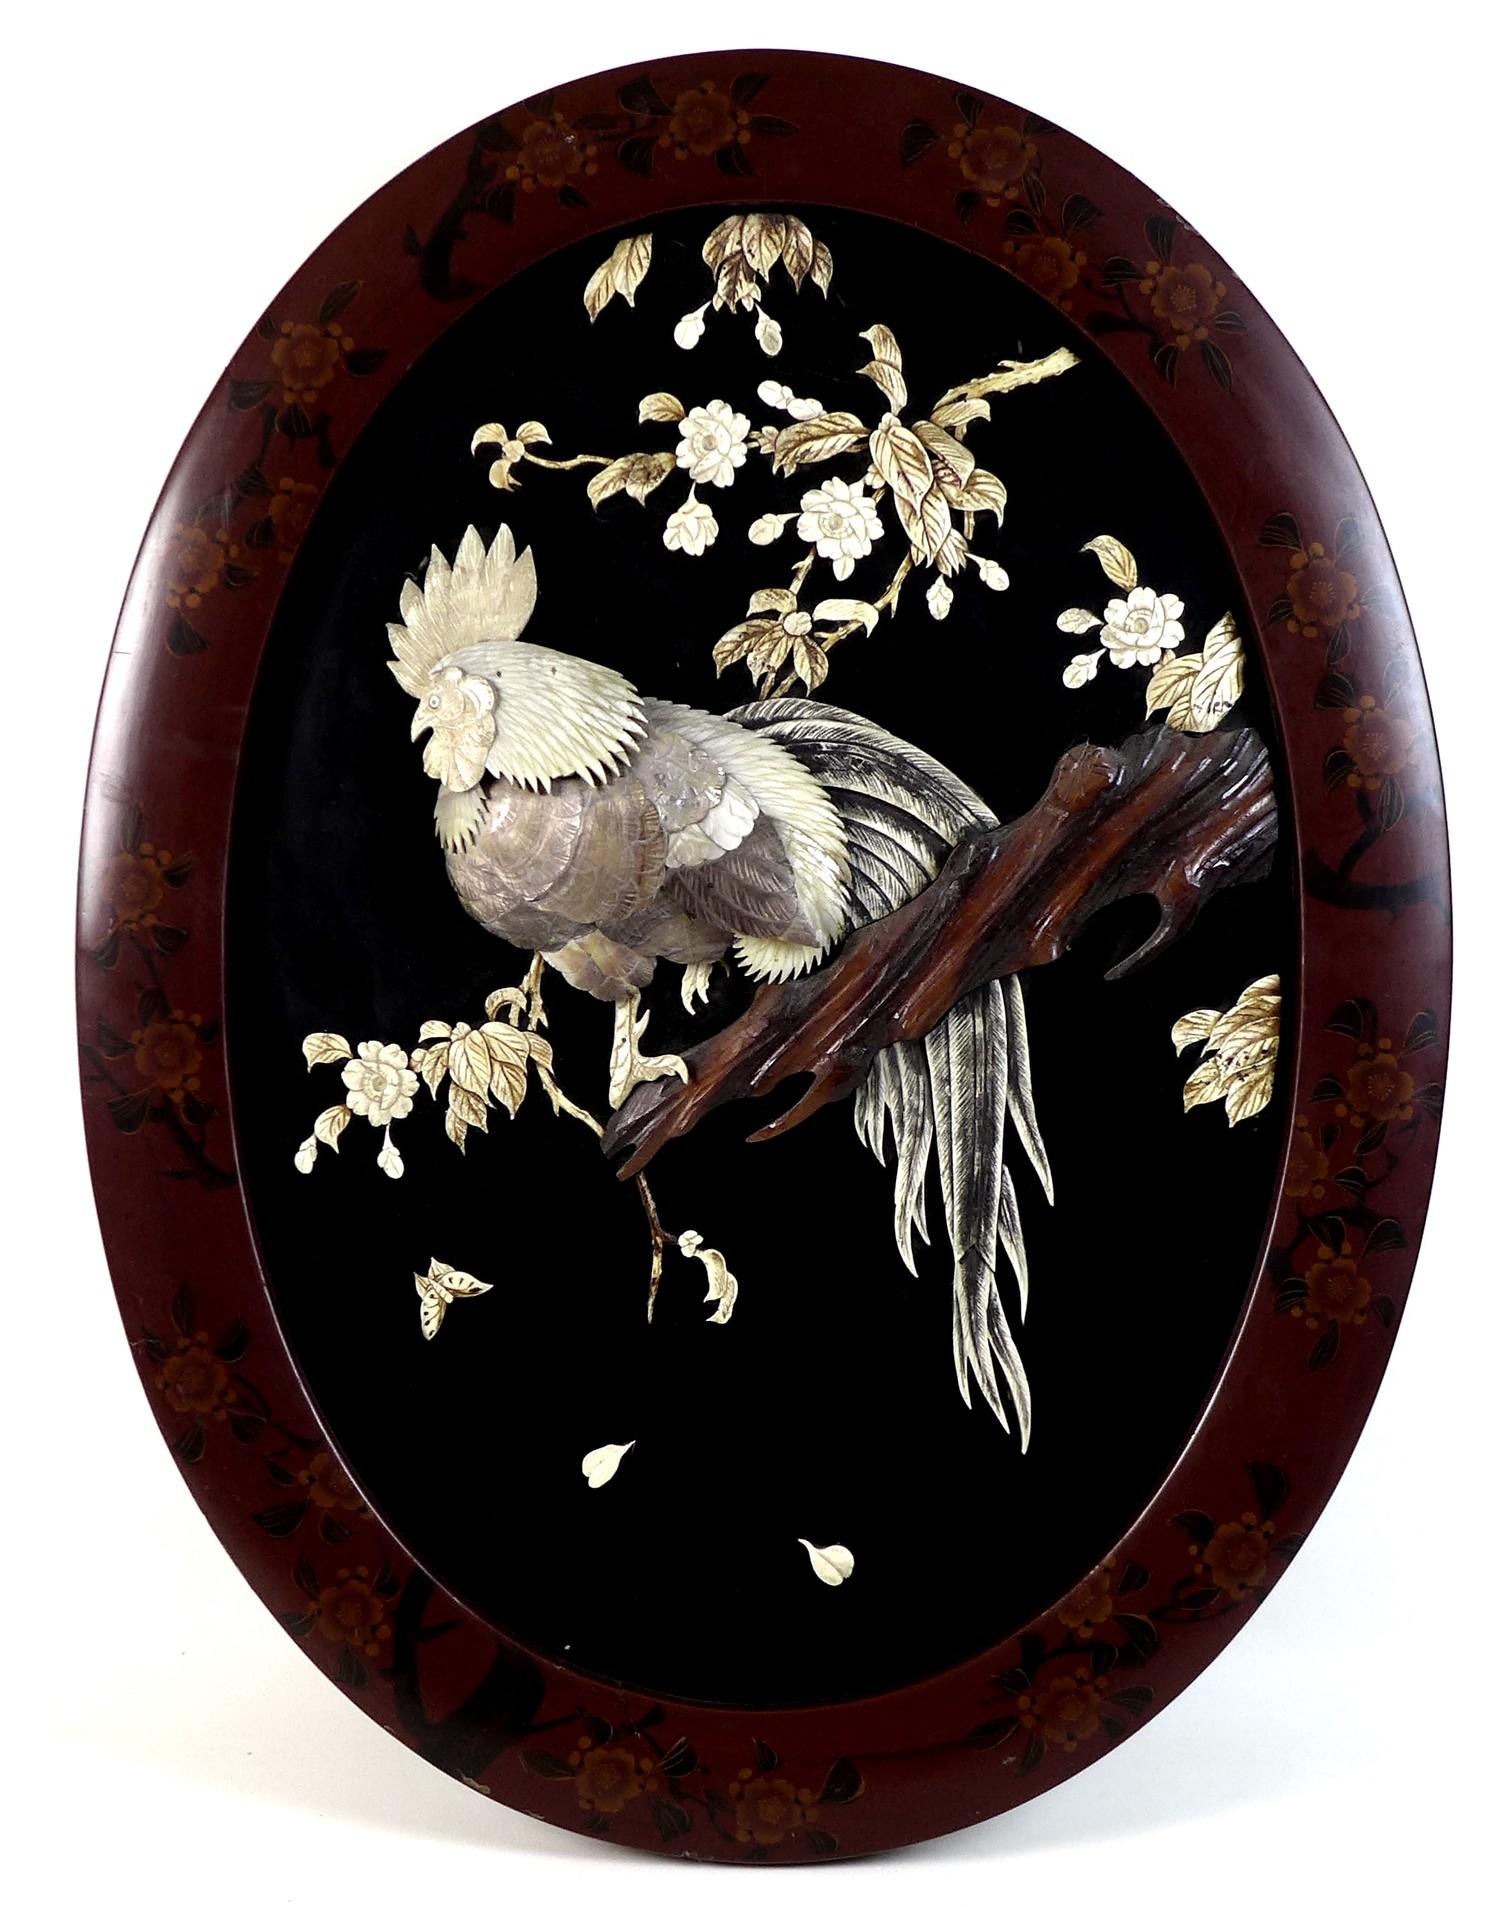 A Japanese oval wall plaque, mid to late 20th century, with relief carved and applied decoration